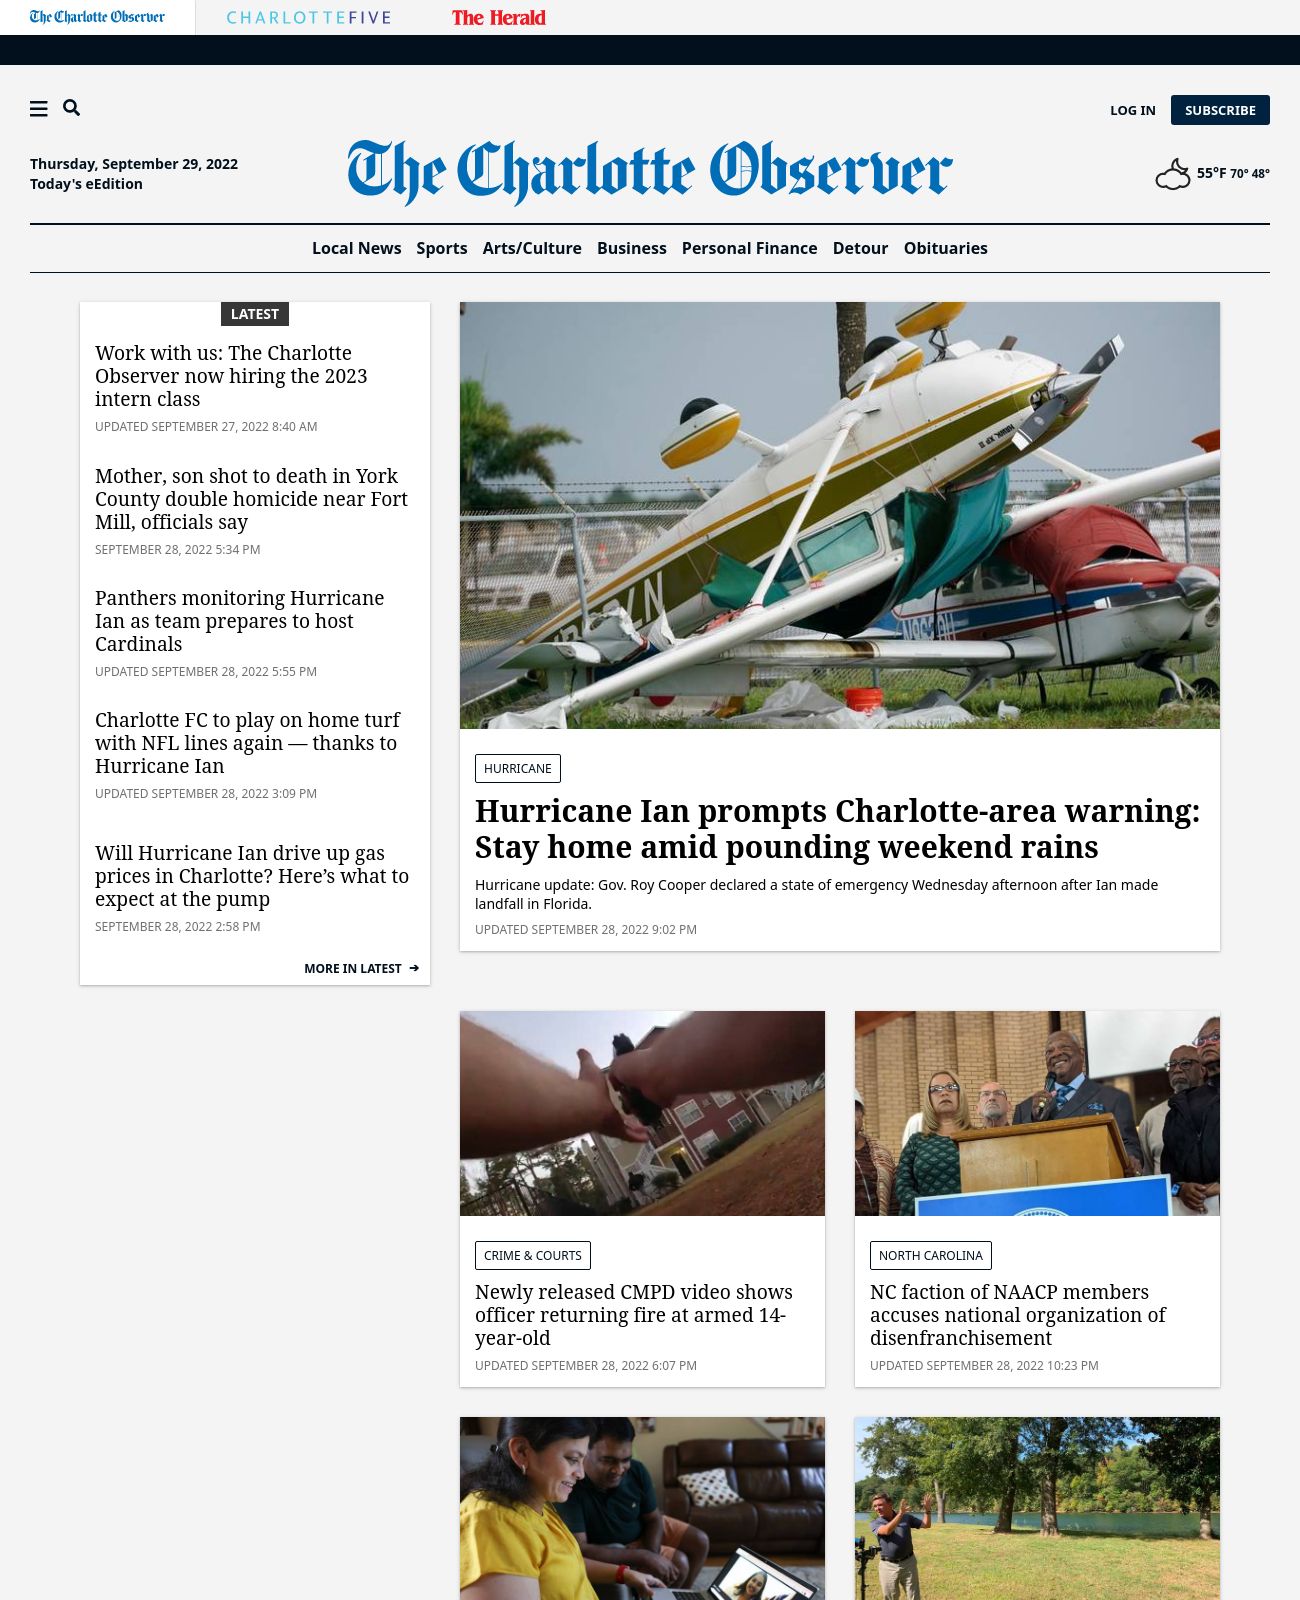 Charlotte Observer at 2022-09-29 03:32:05-04:00 local time